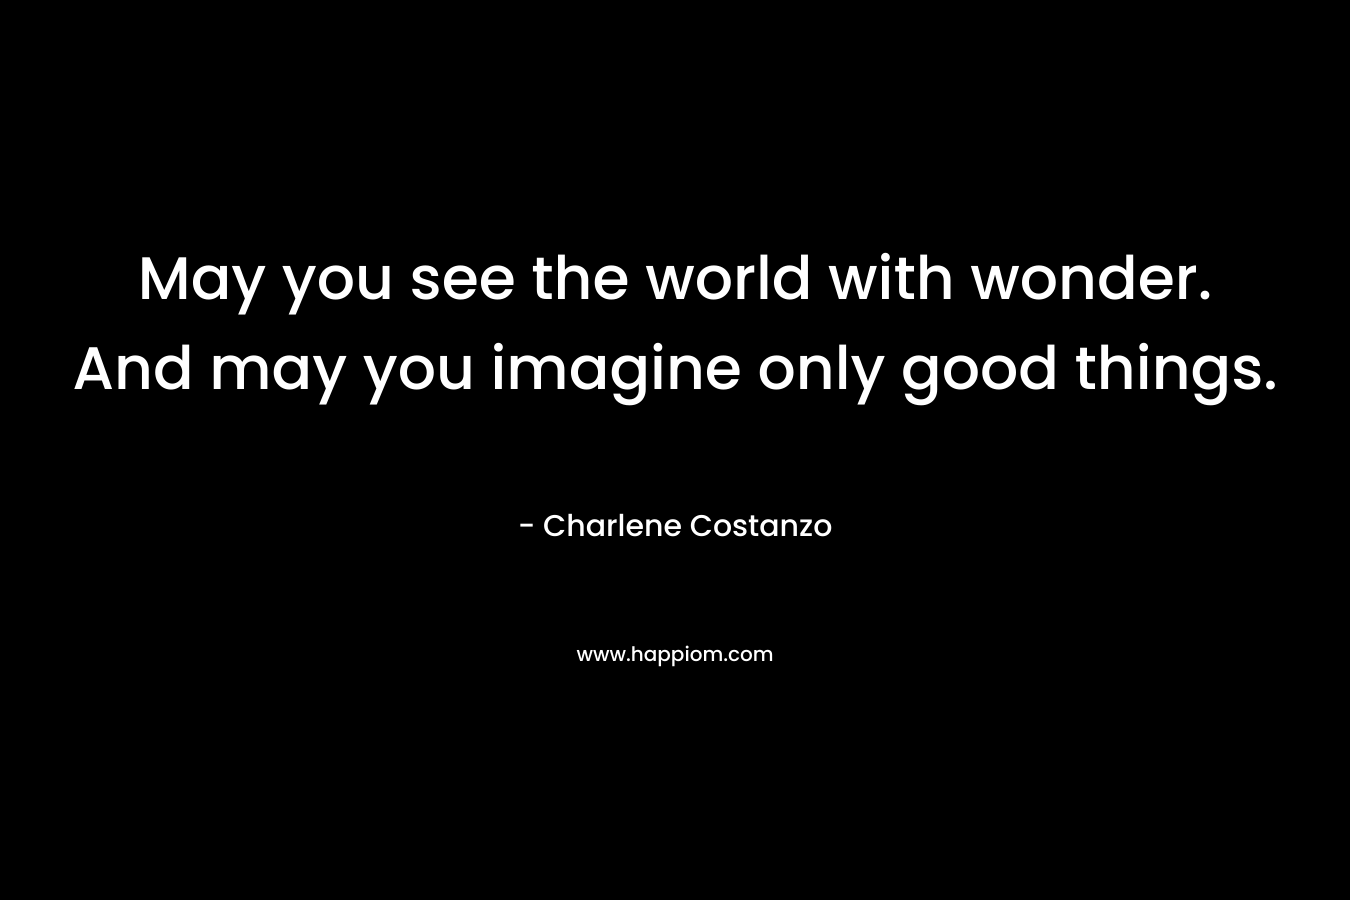 May you see the world with wonder. And may you imagine only good things. – Charlene Costanzo